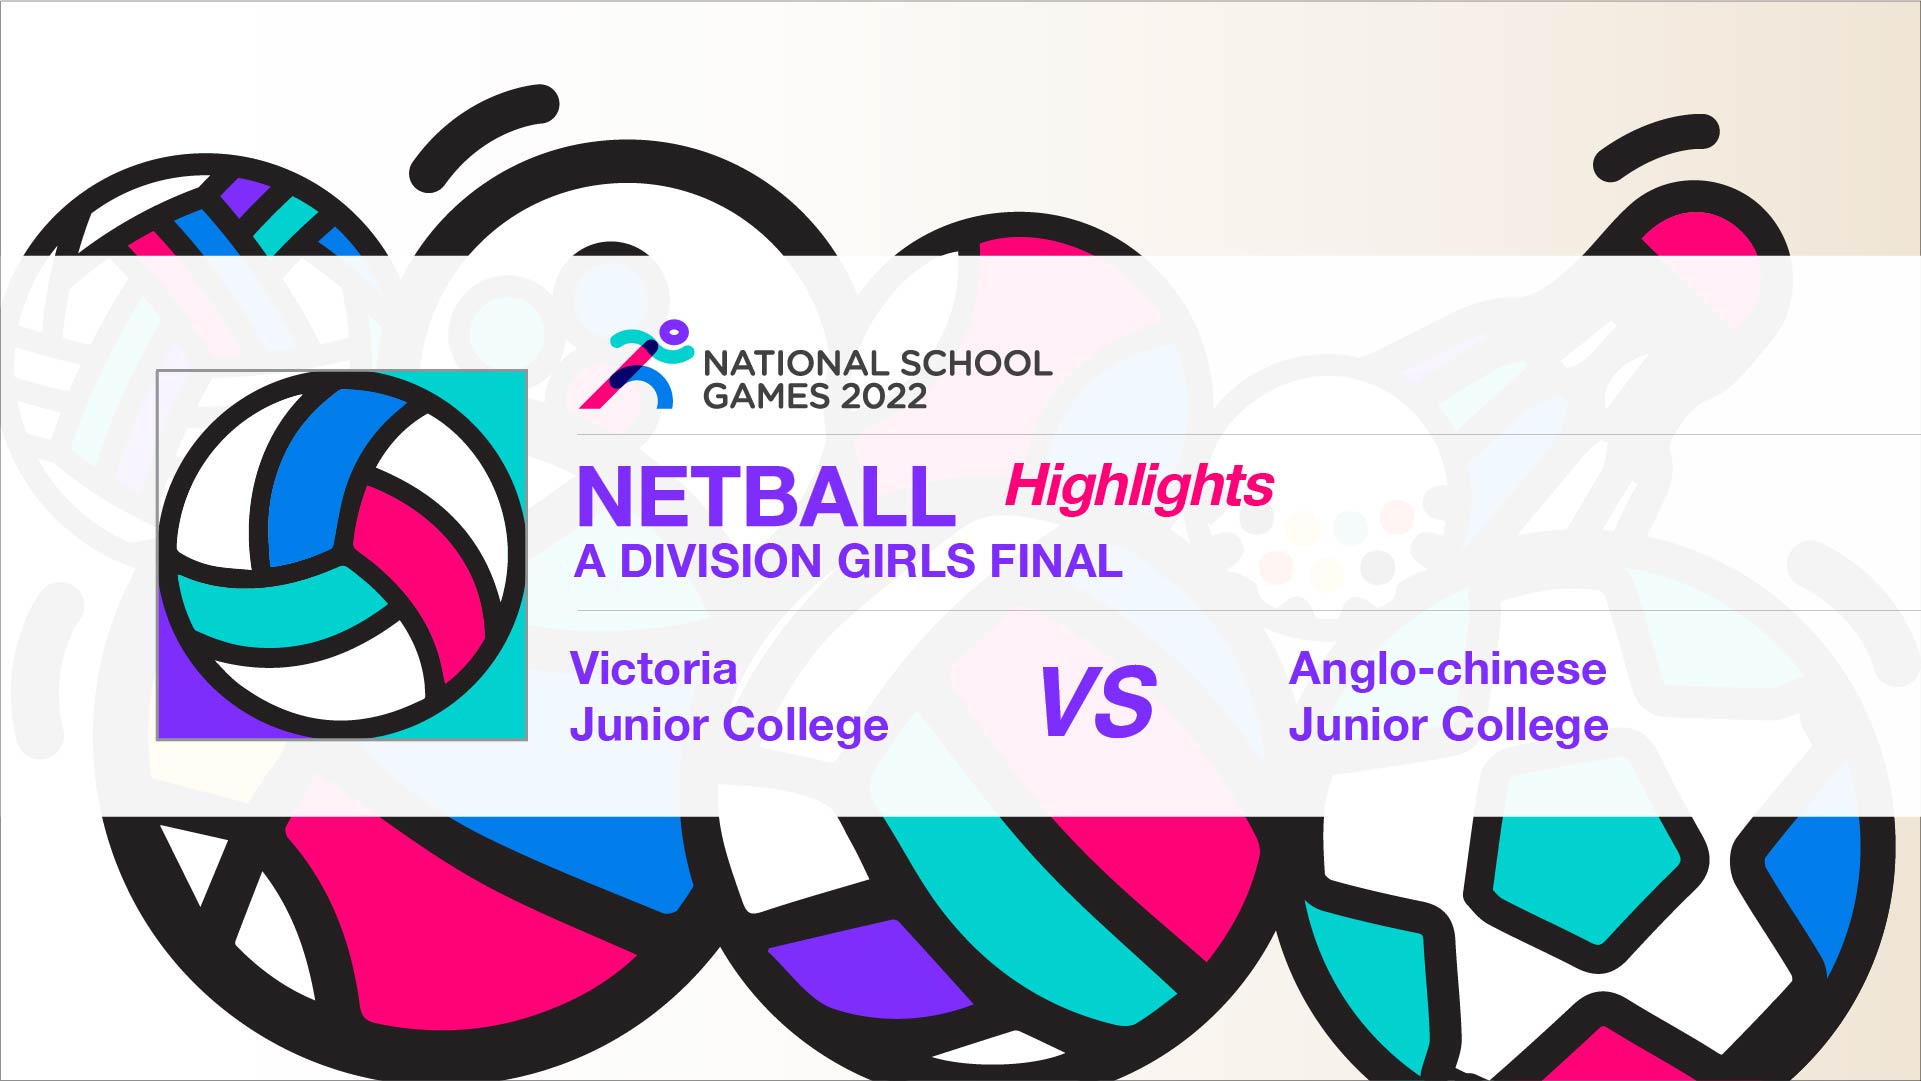 SSSC Netball A Division Girls Final | Victoria Junior College vs Anglo-Chinese Junior College - Highlights